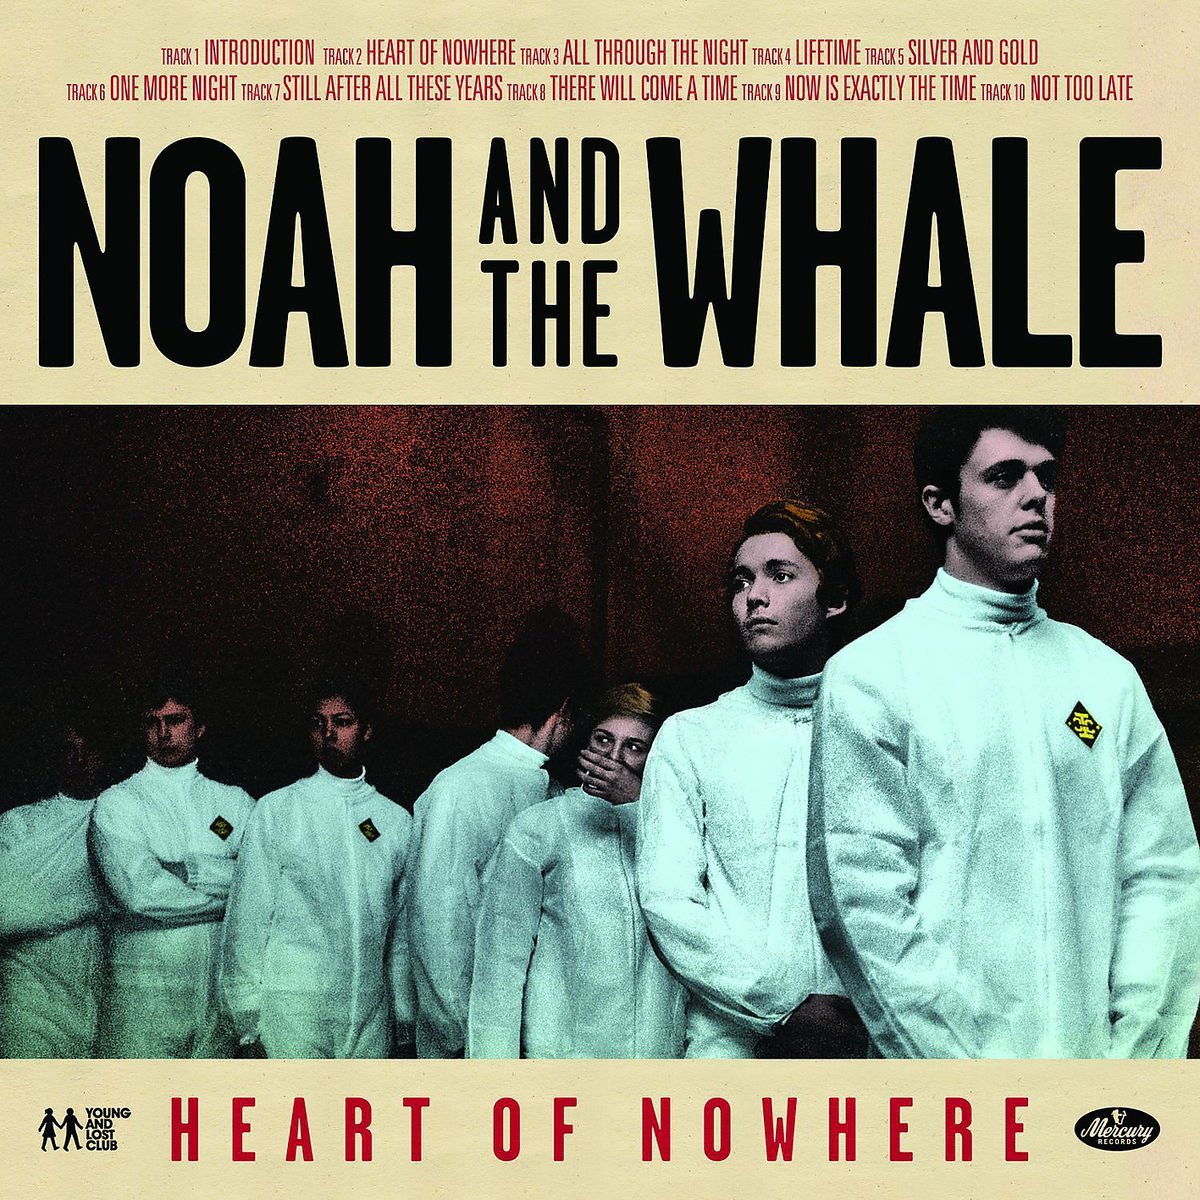 NOAH AND THE WHALE - Heart Of Nowhere (2022 Reissue) - LP - 180g Vinyl